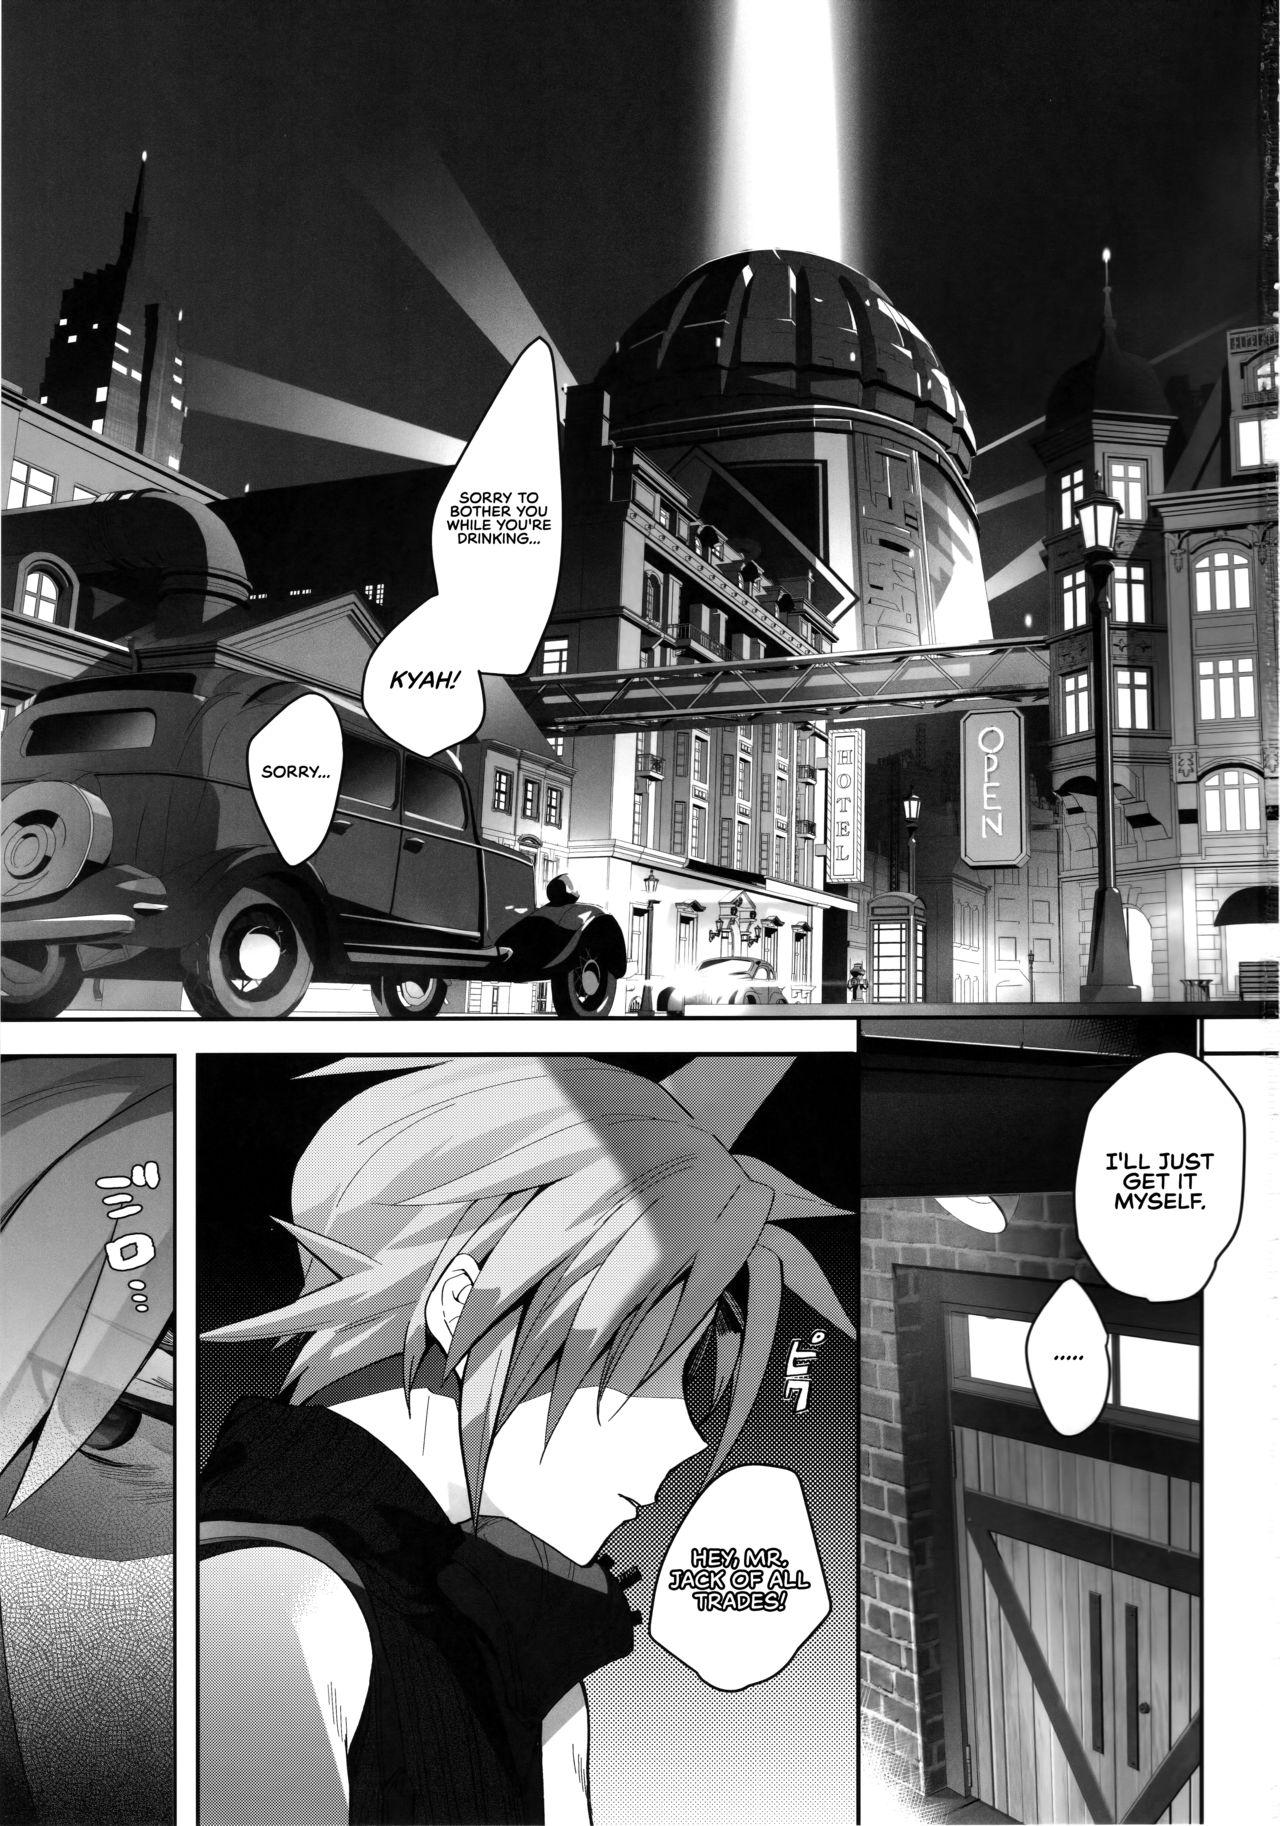 Submission Tantalizing Two Gil - Final fantasy vii Cheat - Page 2